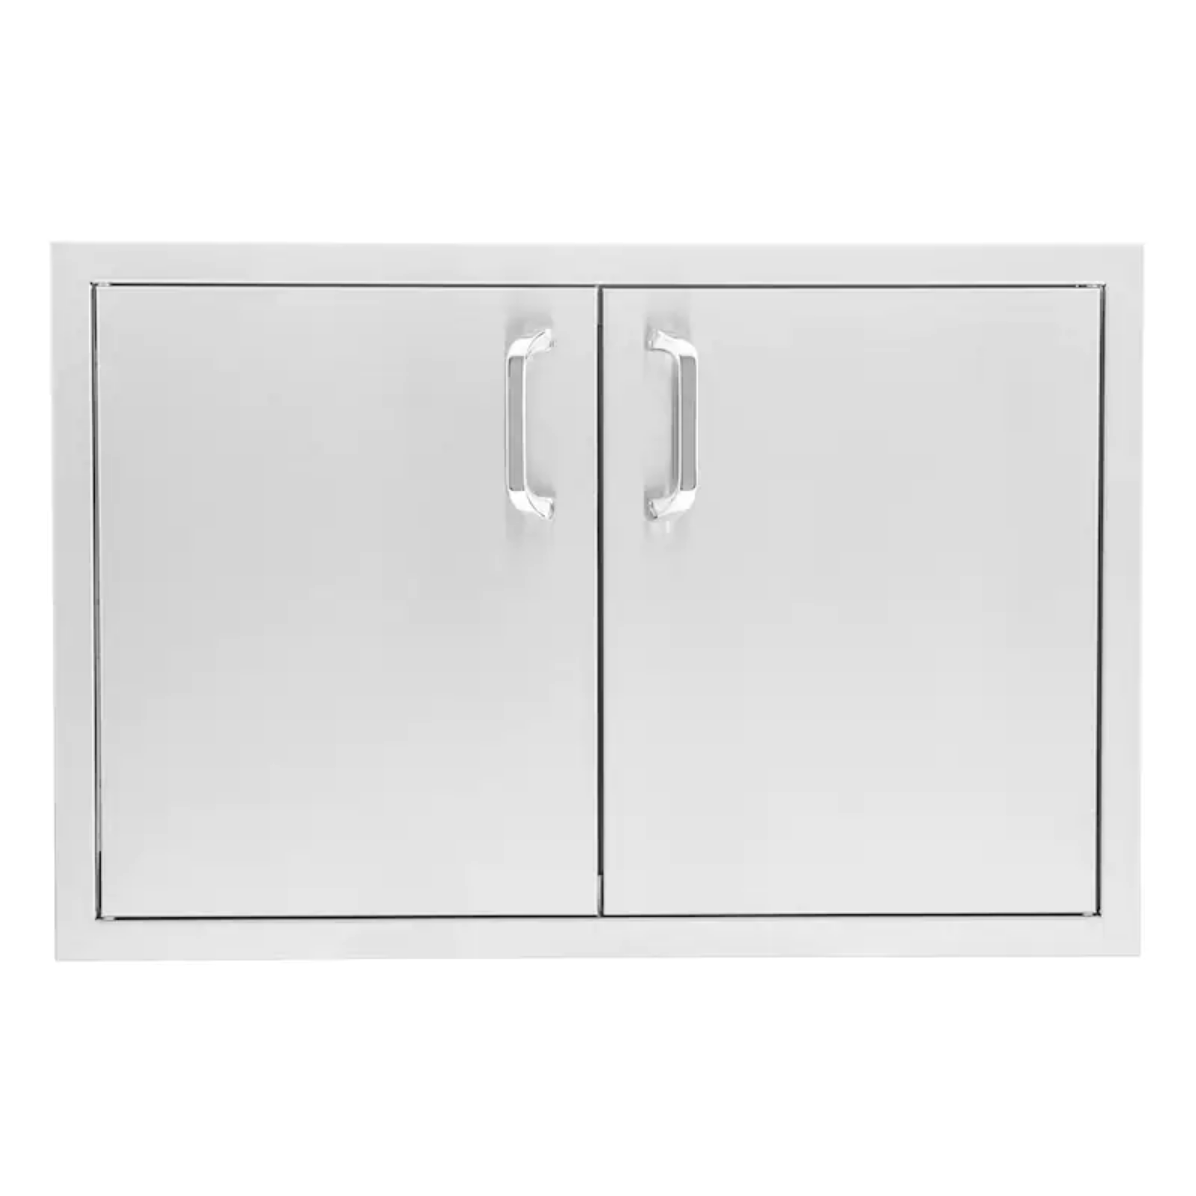 PCM 260 Series 32" Stainless Steel Sealed Dry Storage Pantry With Shelf